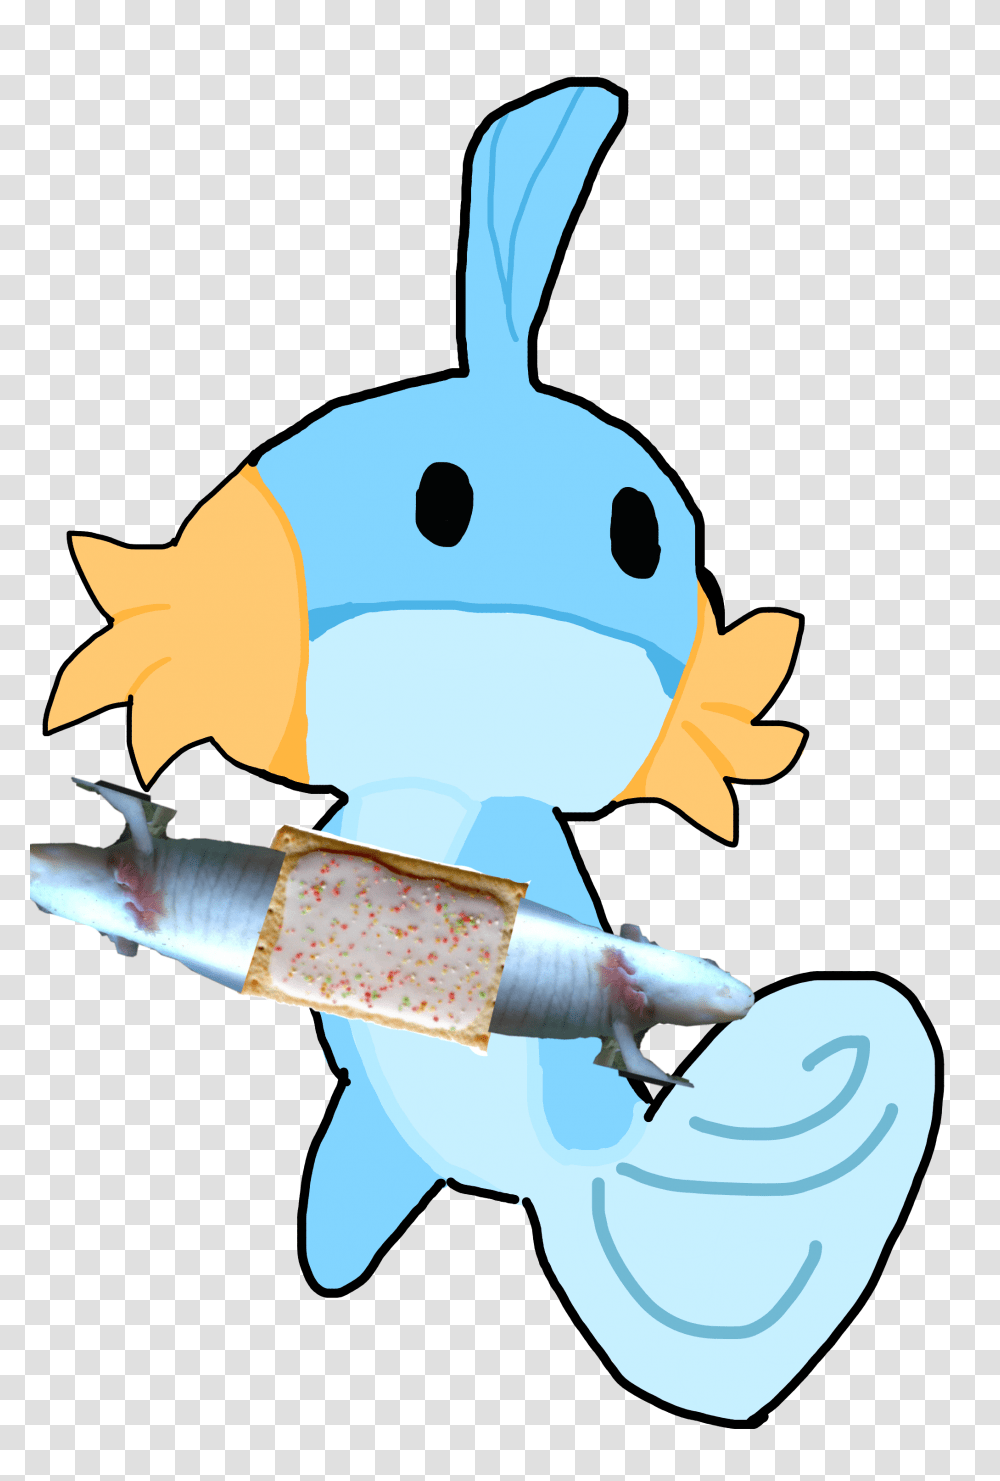 Popular And Trending Mudkip Stickers, Sweets, Food, Confectionery, Toy Transparent Png